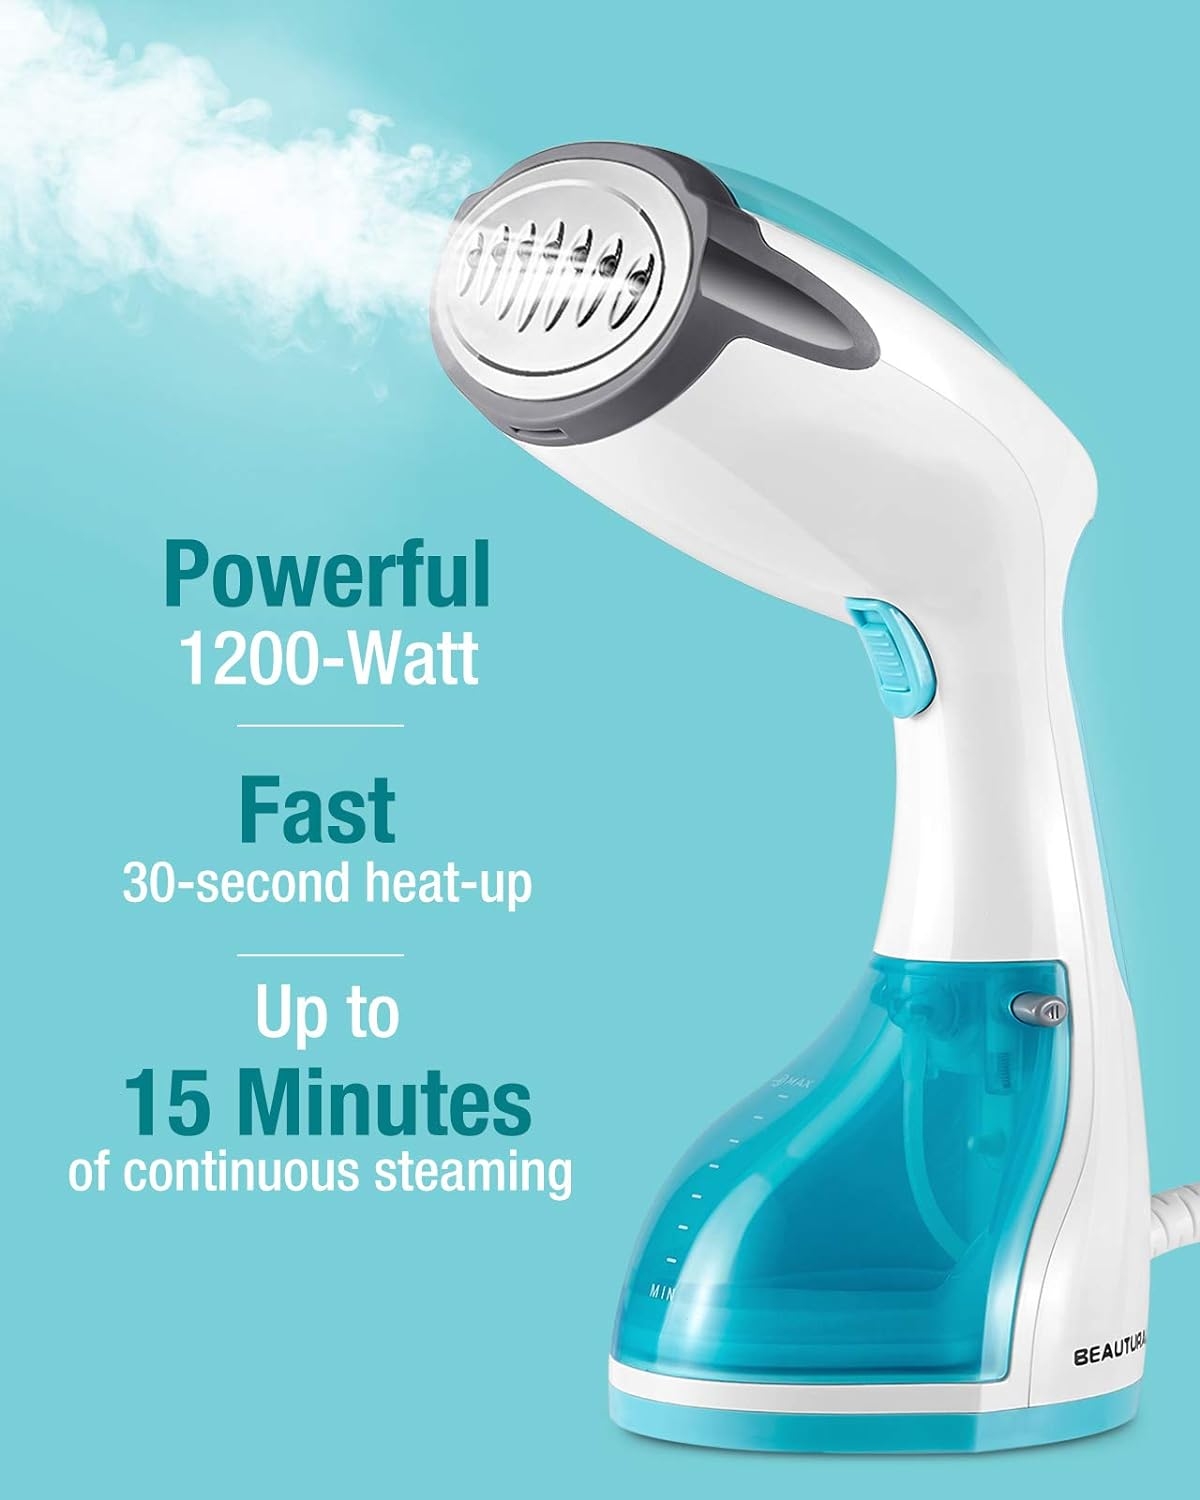 BEAUTURAL Steamer for Clothes with Pump Steam Technology, Portable Handheld Garment Fabric Wrinkles Remover, 30-Second Fast Heat-up, Auto-Off, Large Detachable Water Tank